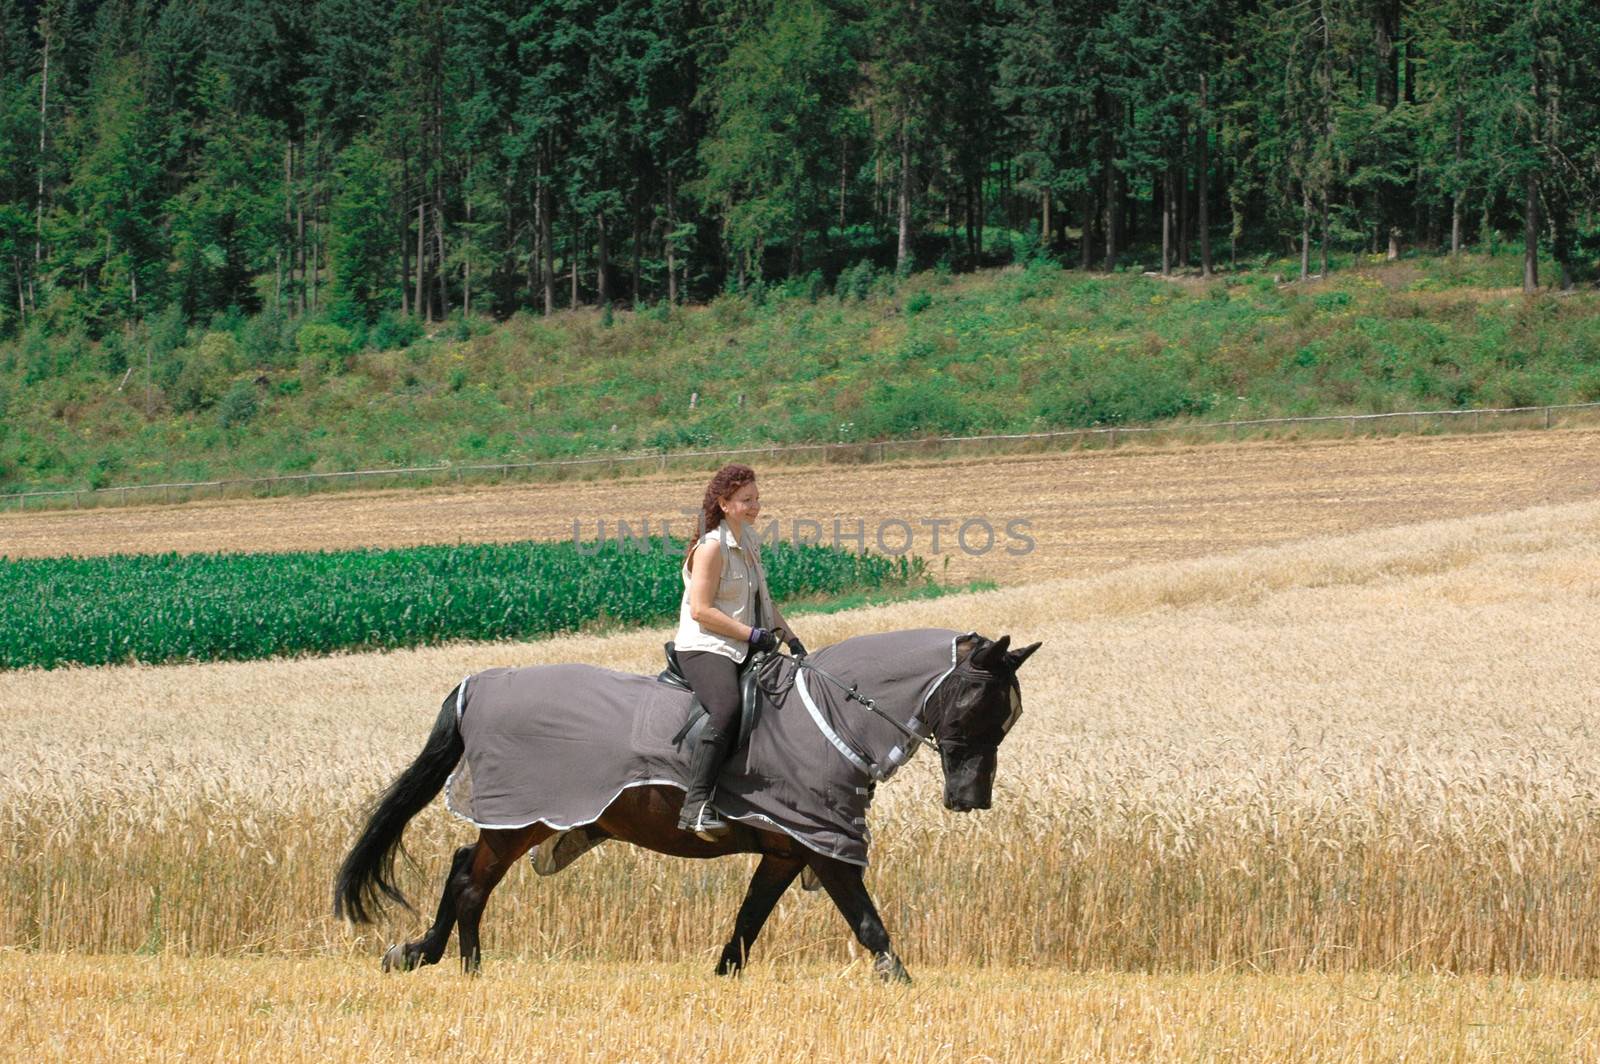 Horseback rides on the field. The horse is protected from insects with blanket-net.